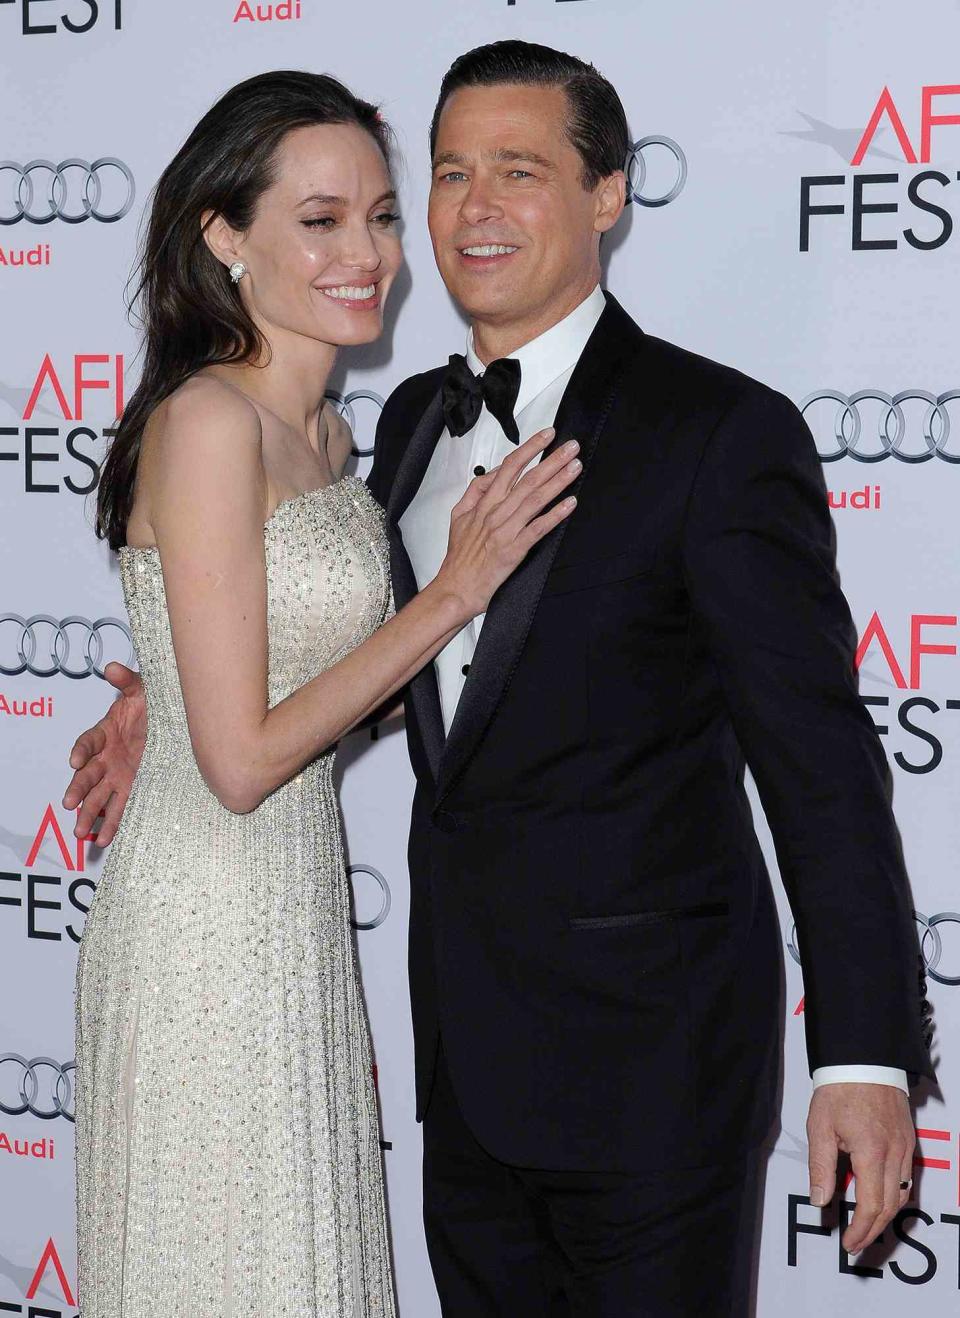 Actors Angelina Jolie and Brad Pitt arrive at the AFI FEST 2015 presented by Audi Opening Night Gala Premiere of Universal Pictures' 'By The Sea' at TCL Chinese 6 Theatres on November 5, 2015 in Hollywood, California